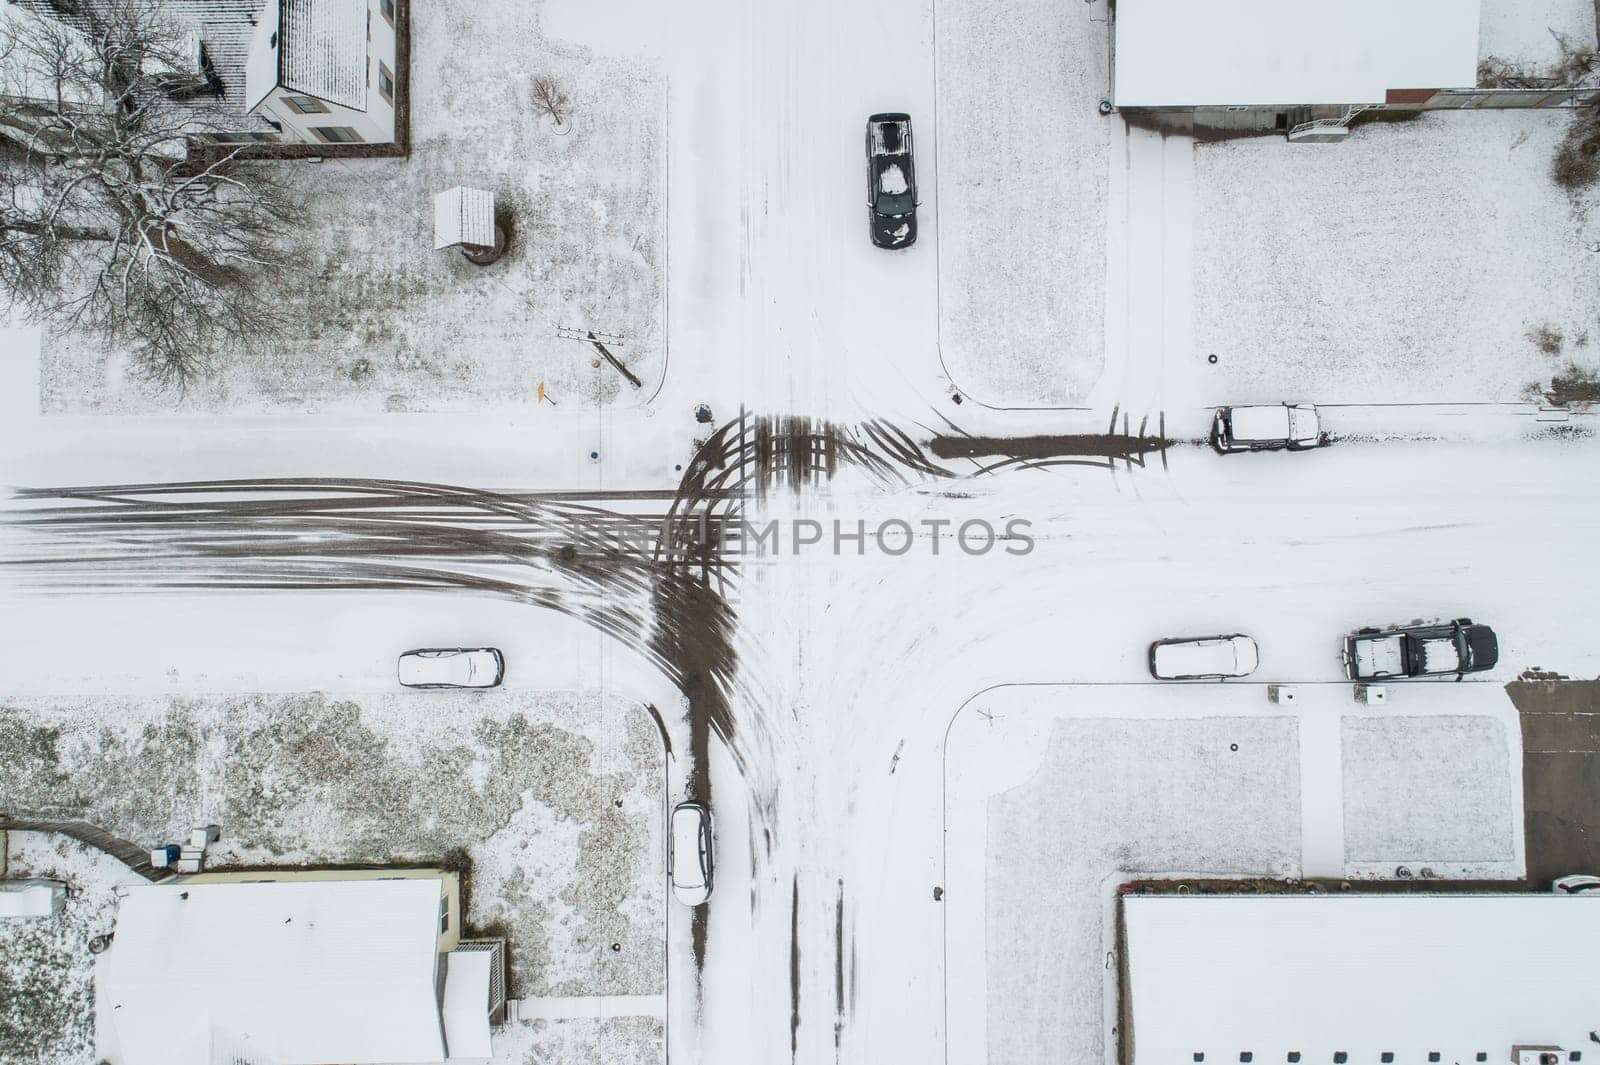 looking down at a snow covered intersection in a city